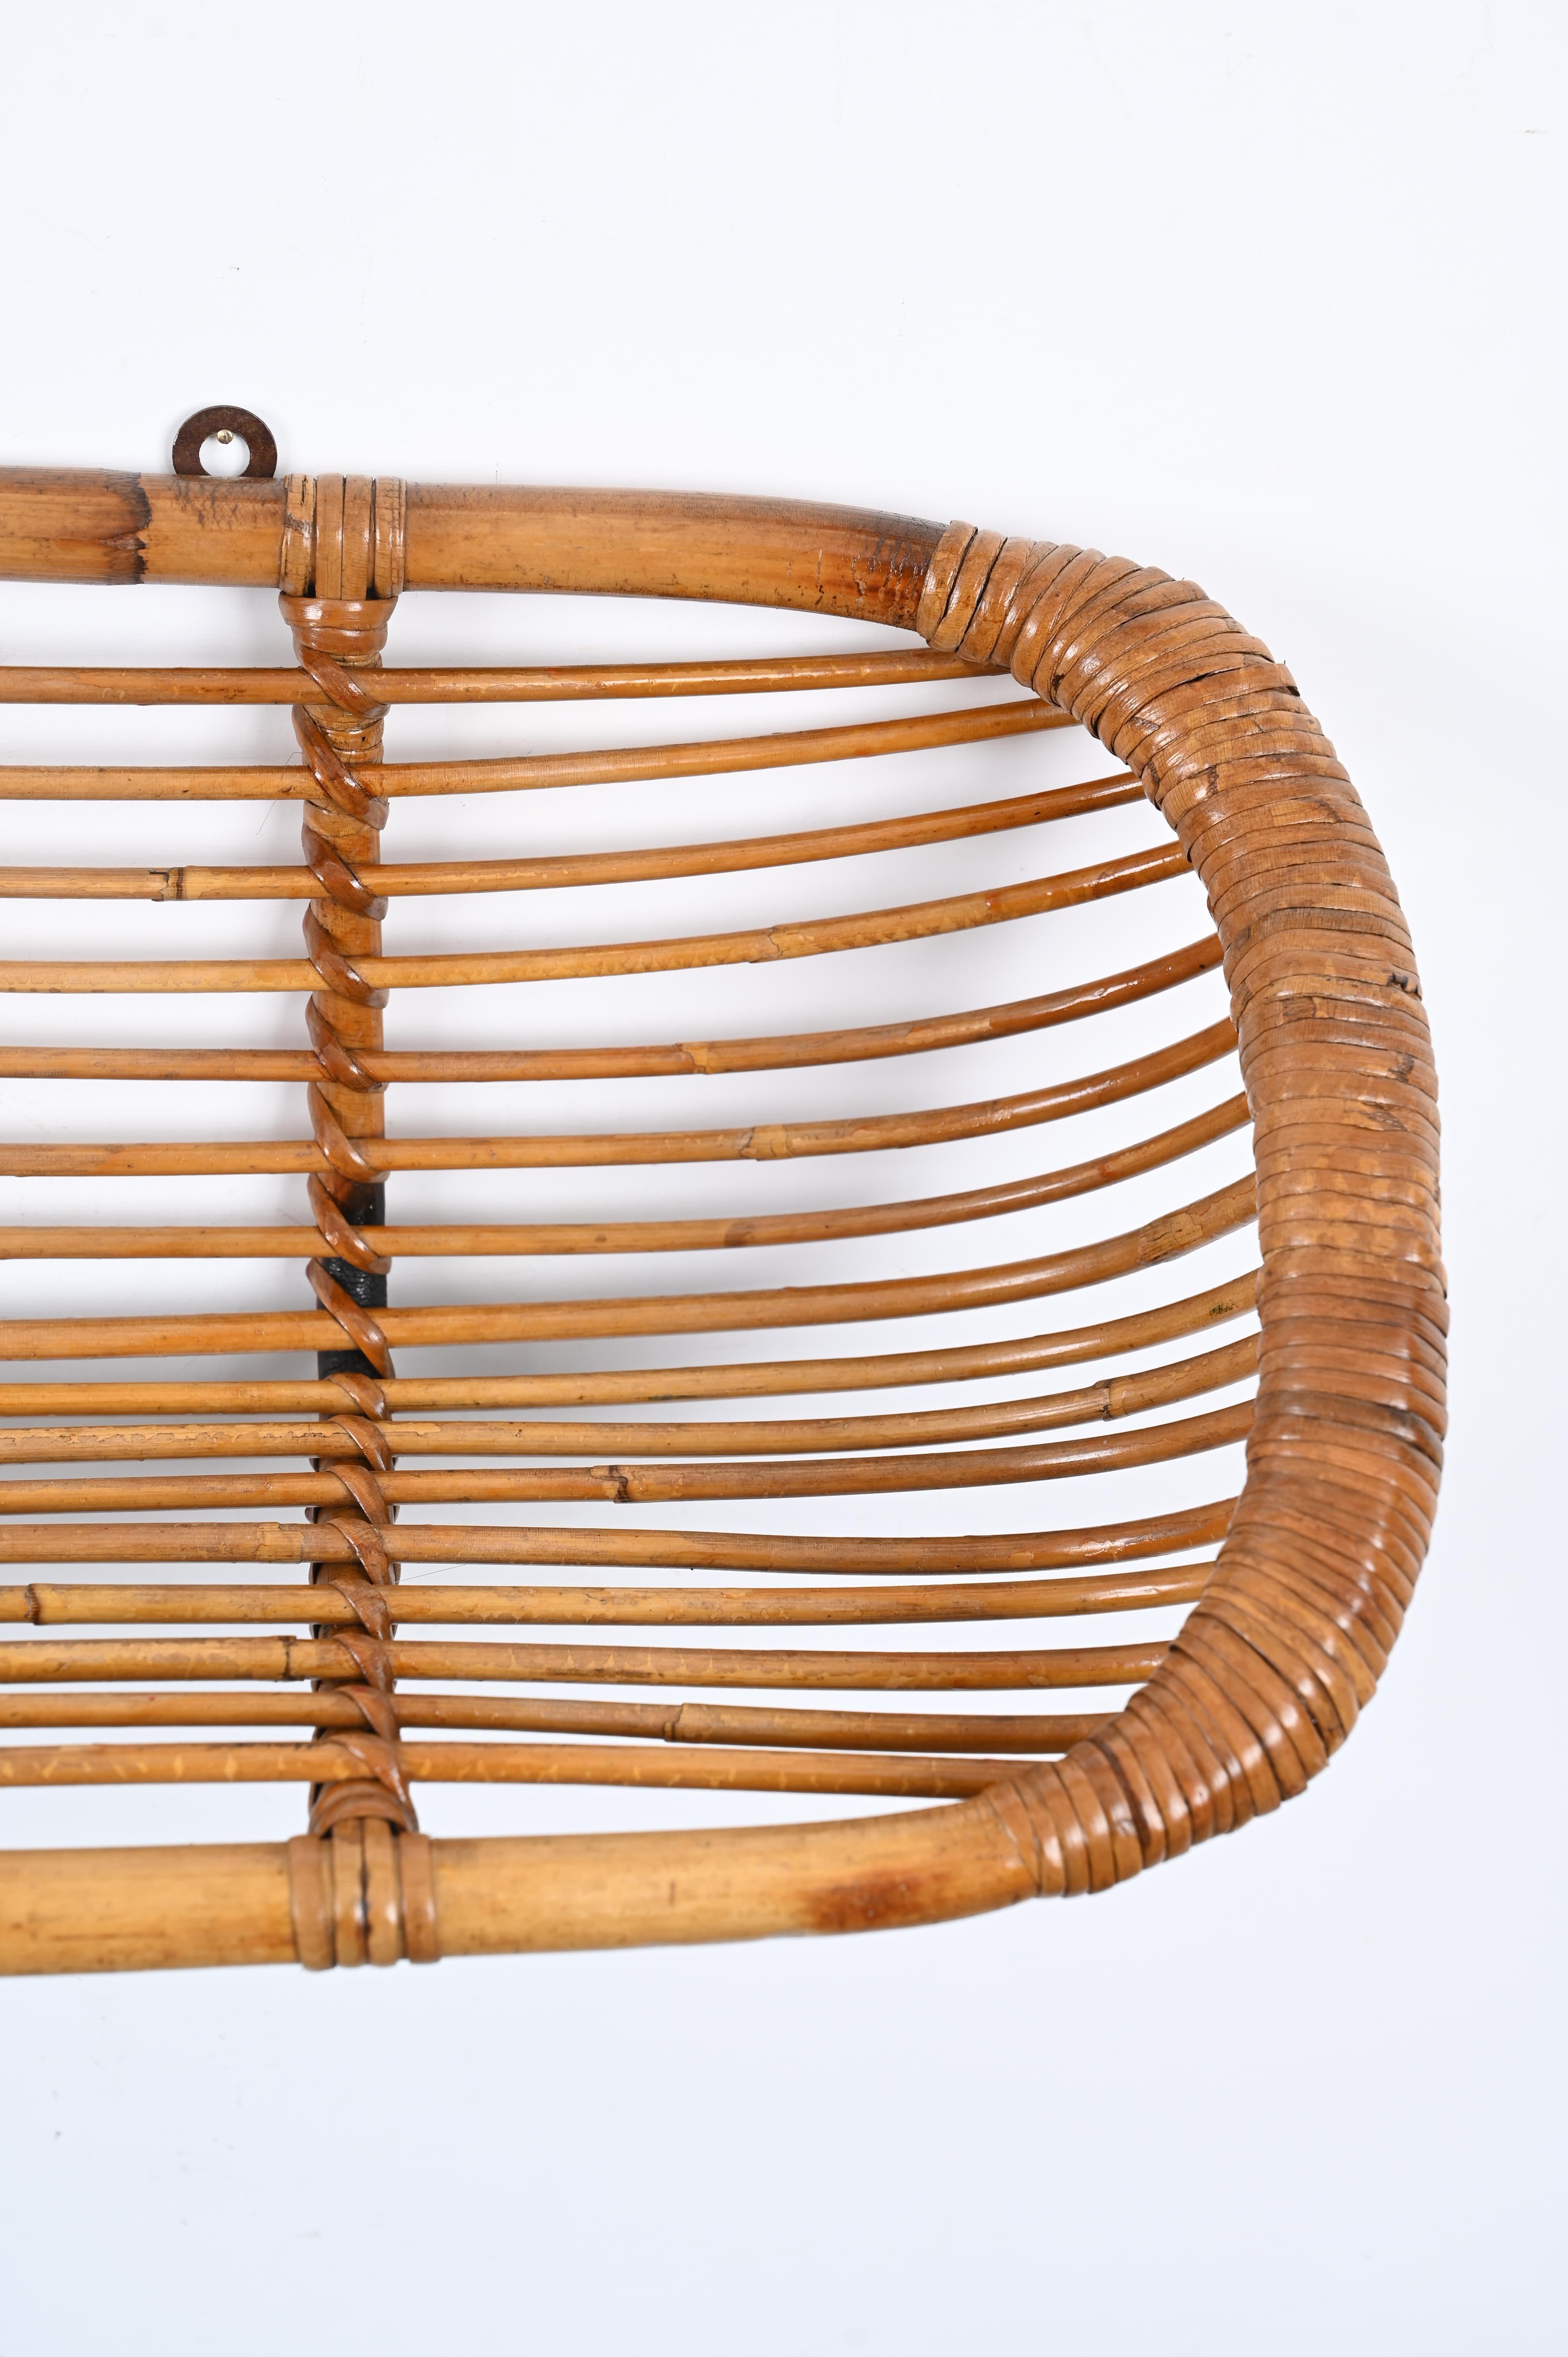  Franco Albini Mid-Century Wall Shelf in Rattan and Bamboo, Italy, 1960s For Sale 1